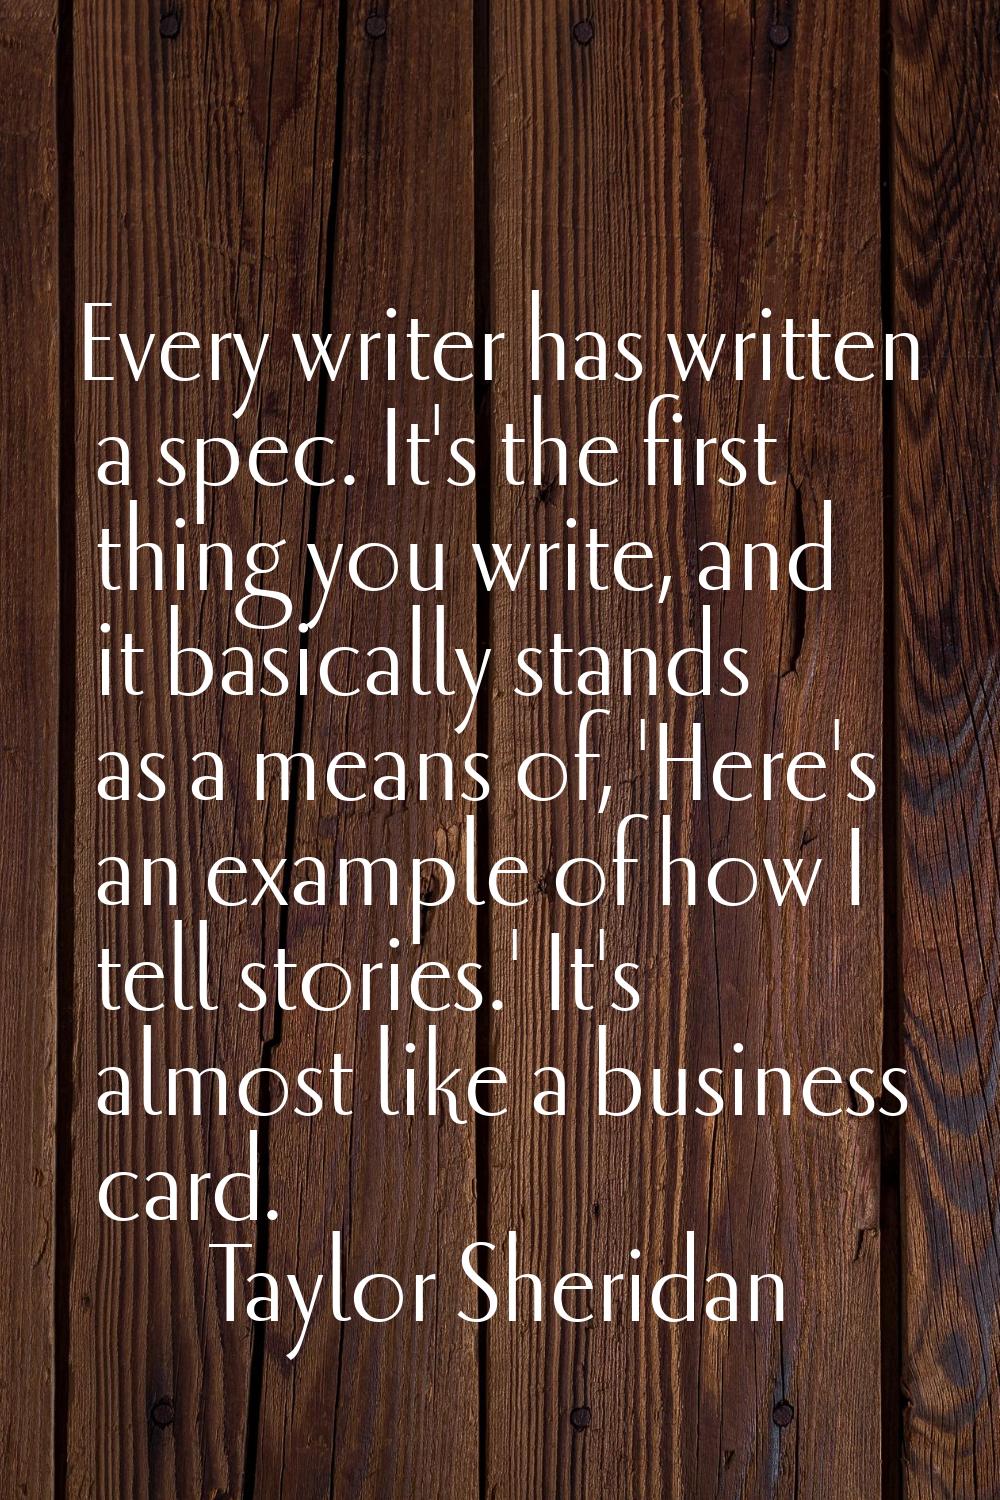 Every writer has written a spec. It's the first thing you write, and it basically stands as a means